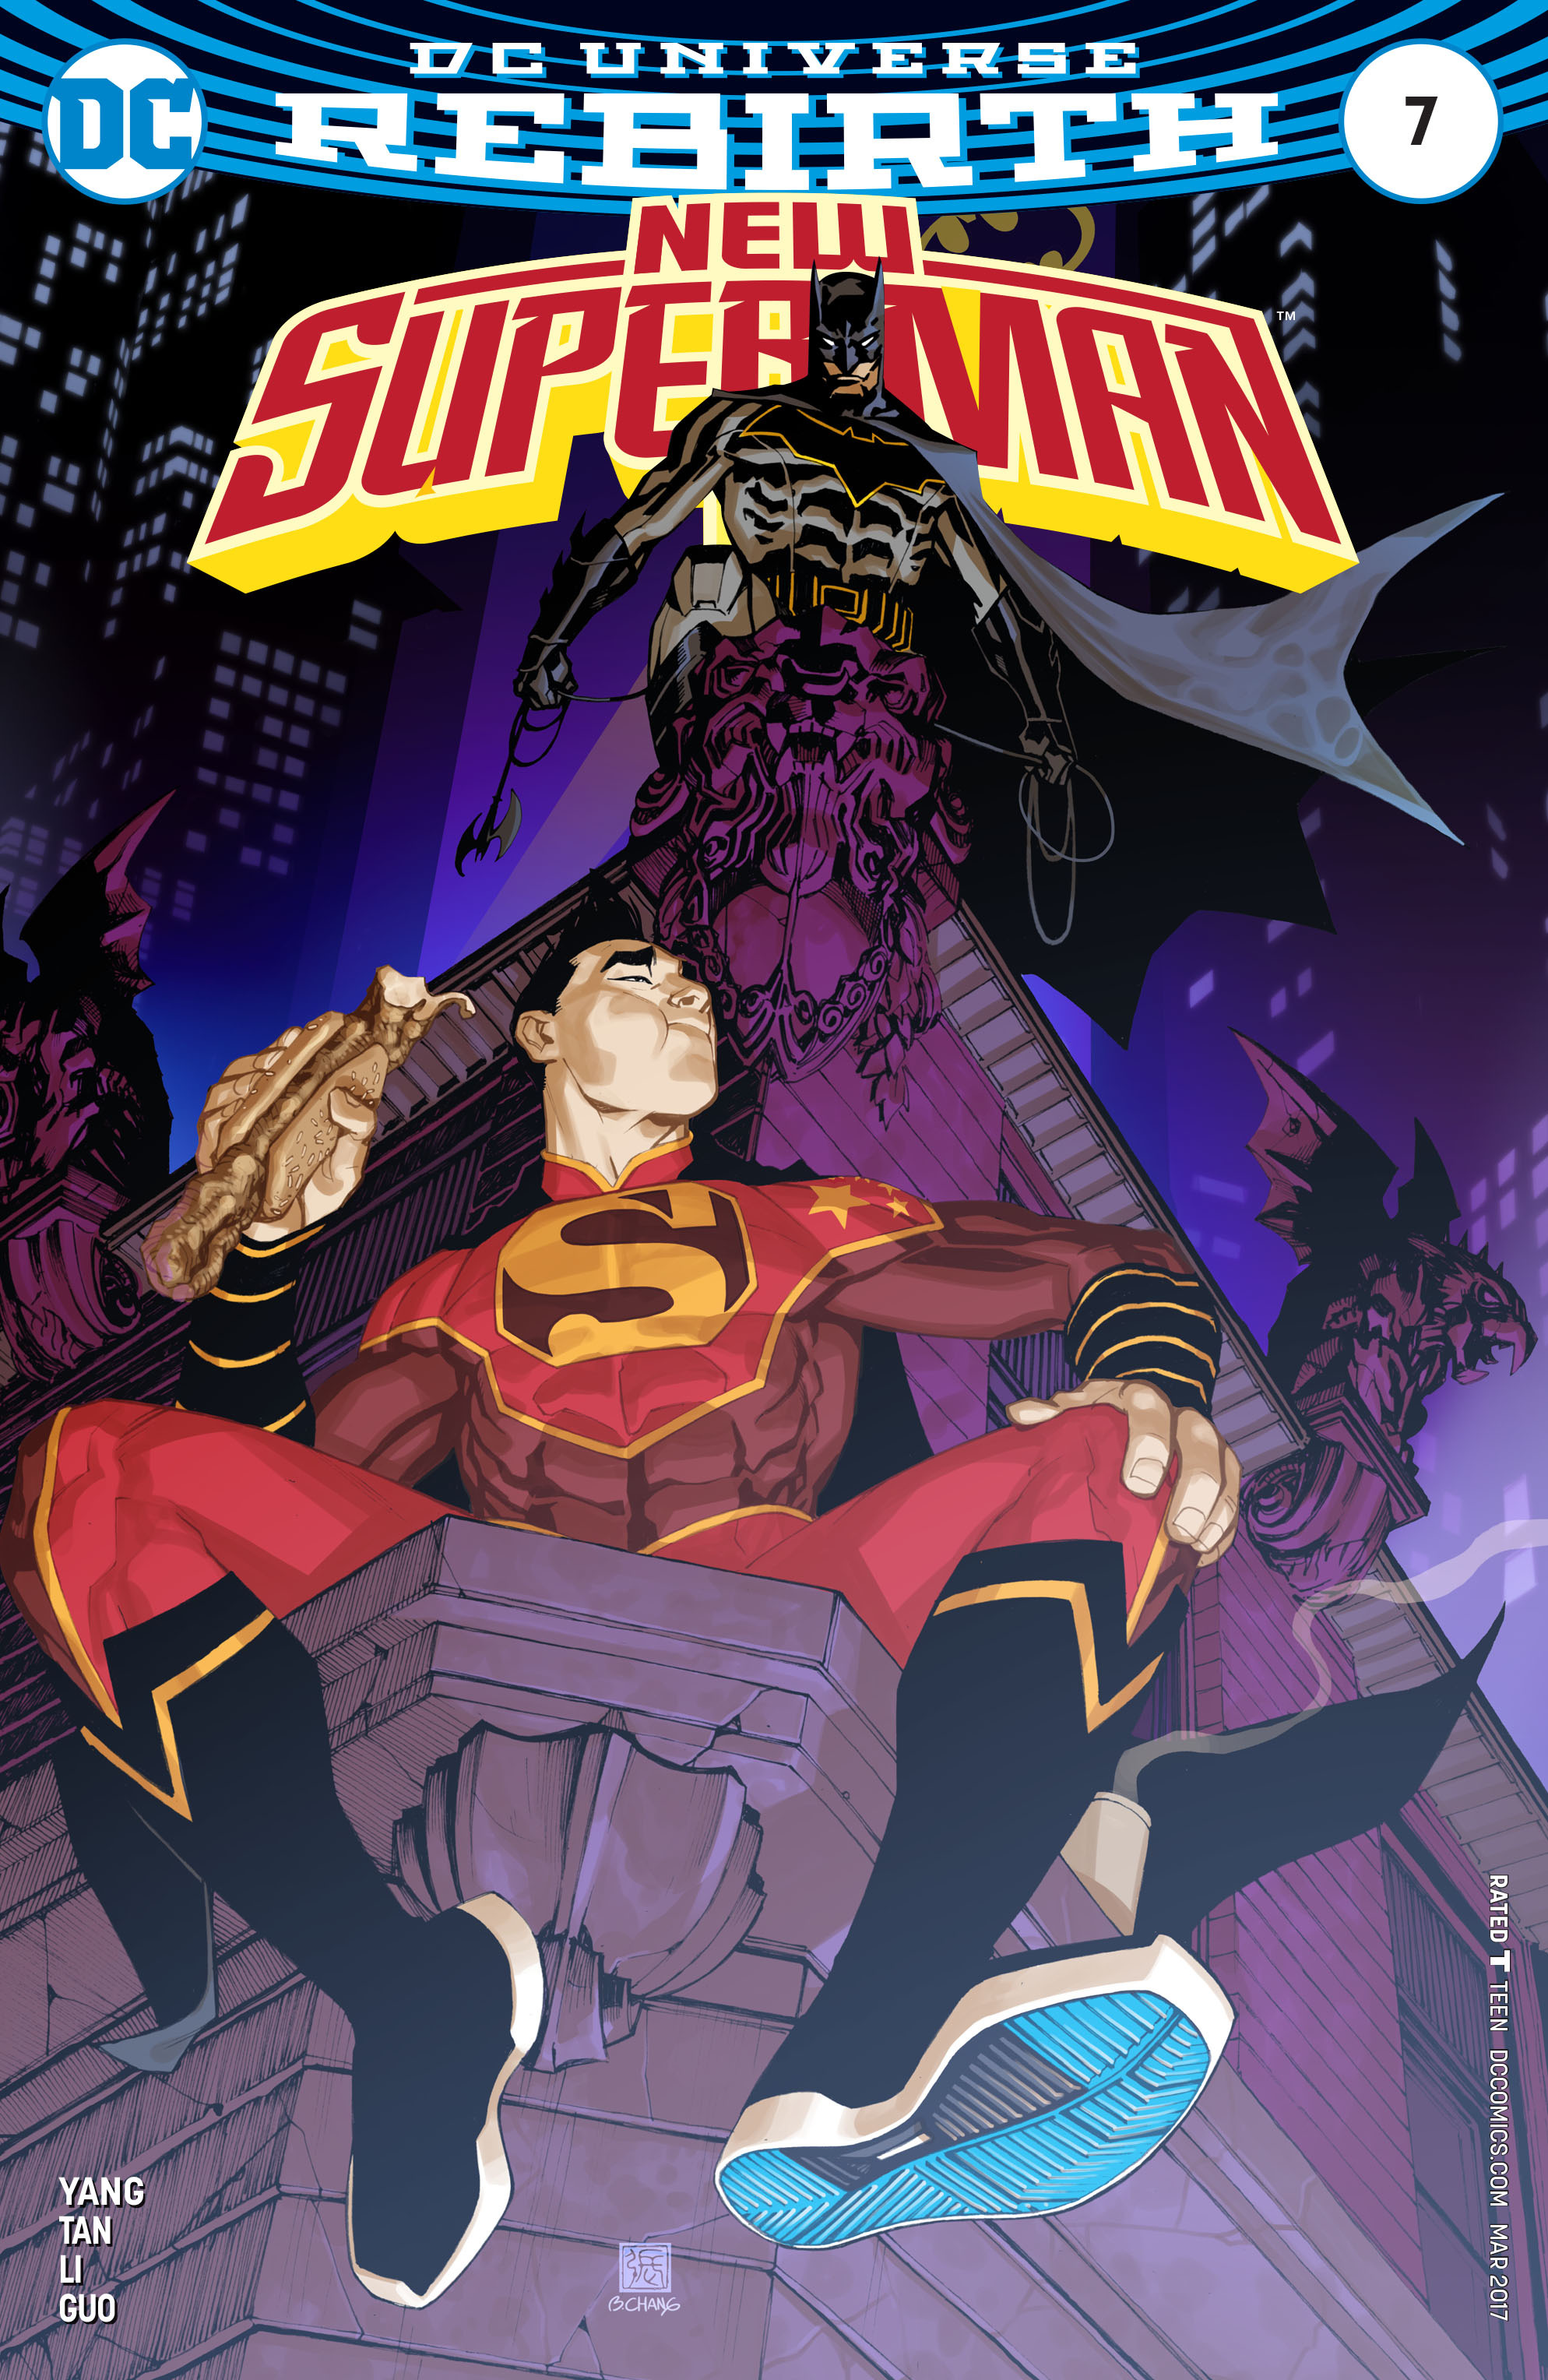 Read online New Super-Man comic -  Issue #7 - 3